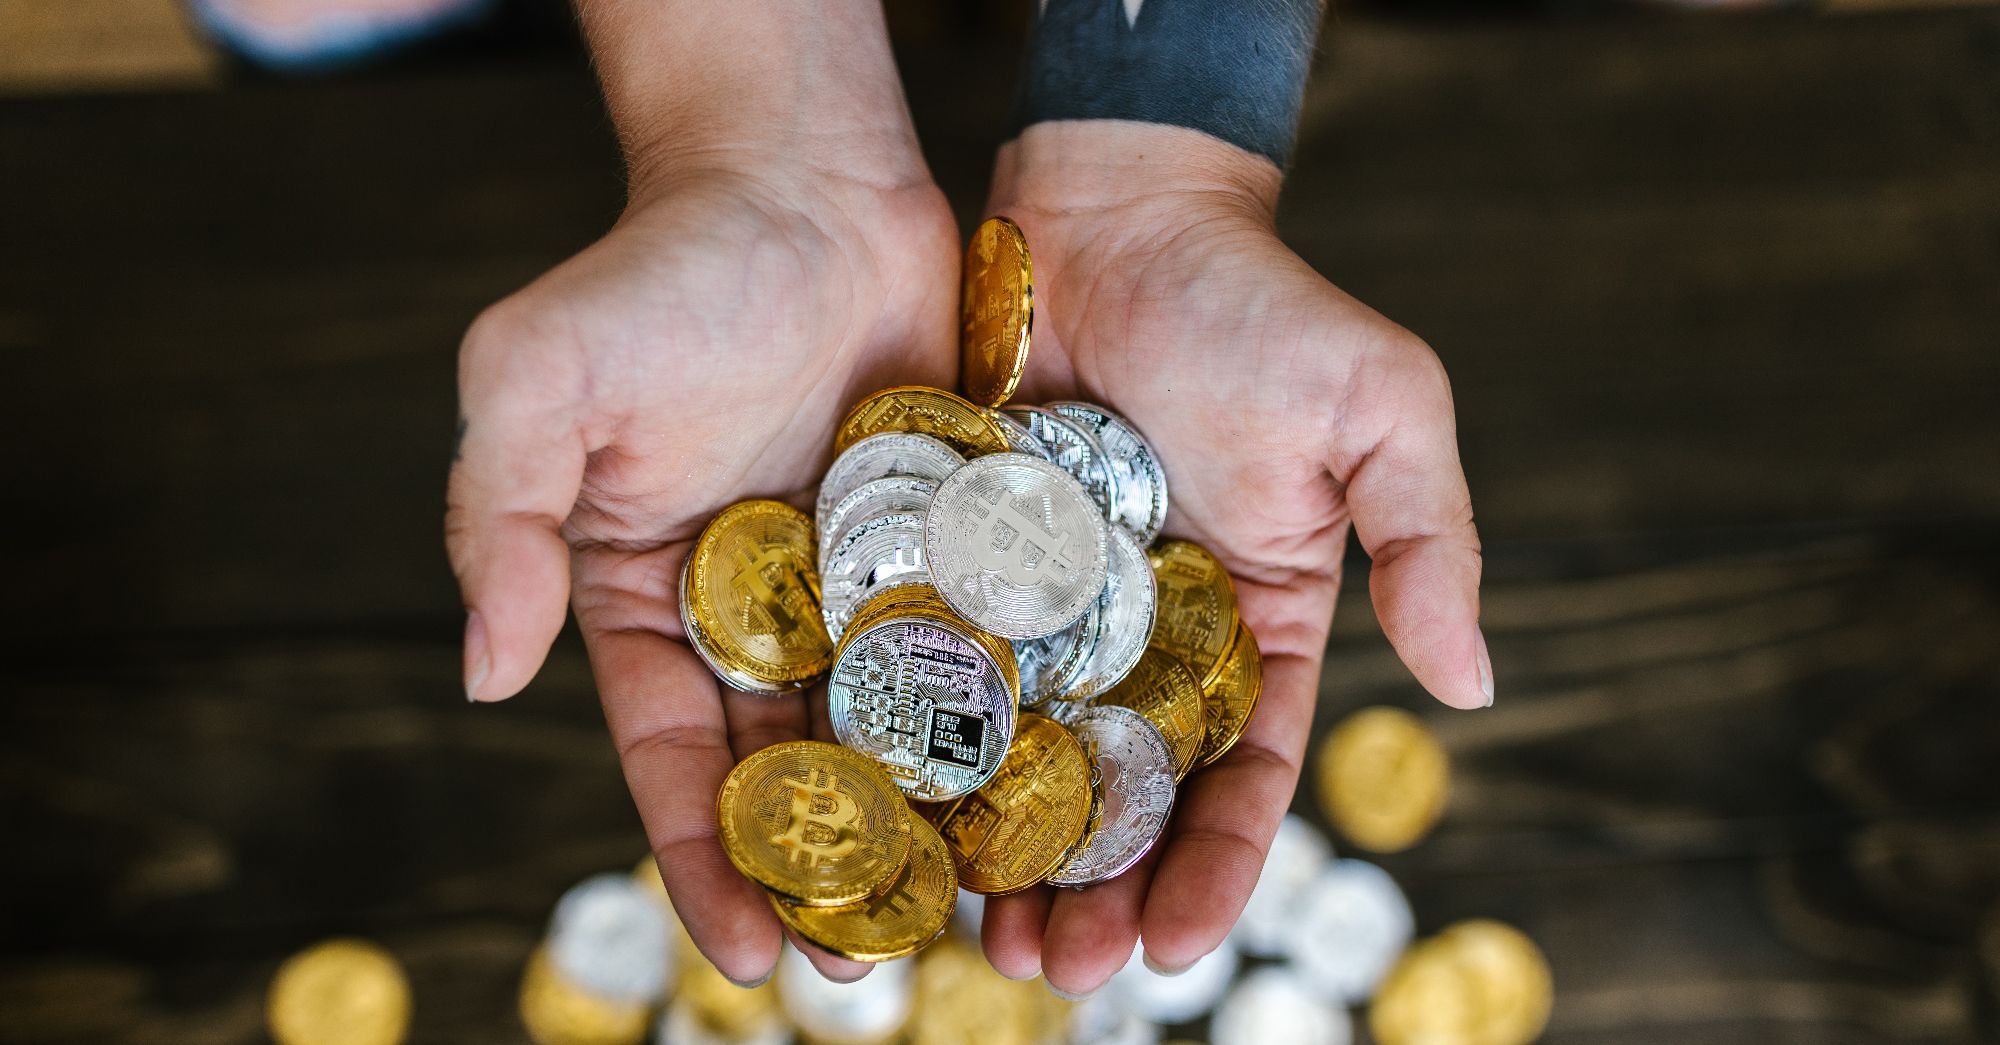 crypto coins being held in hands